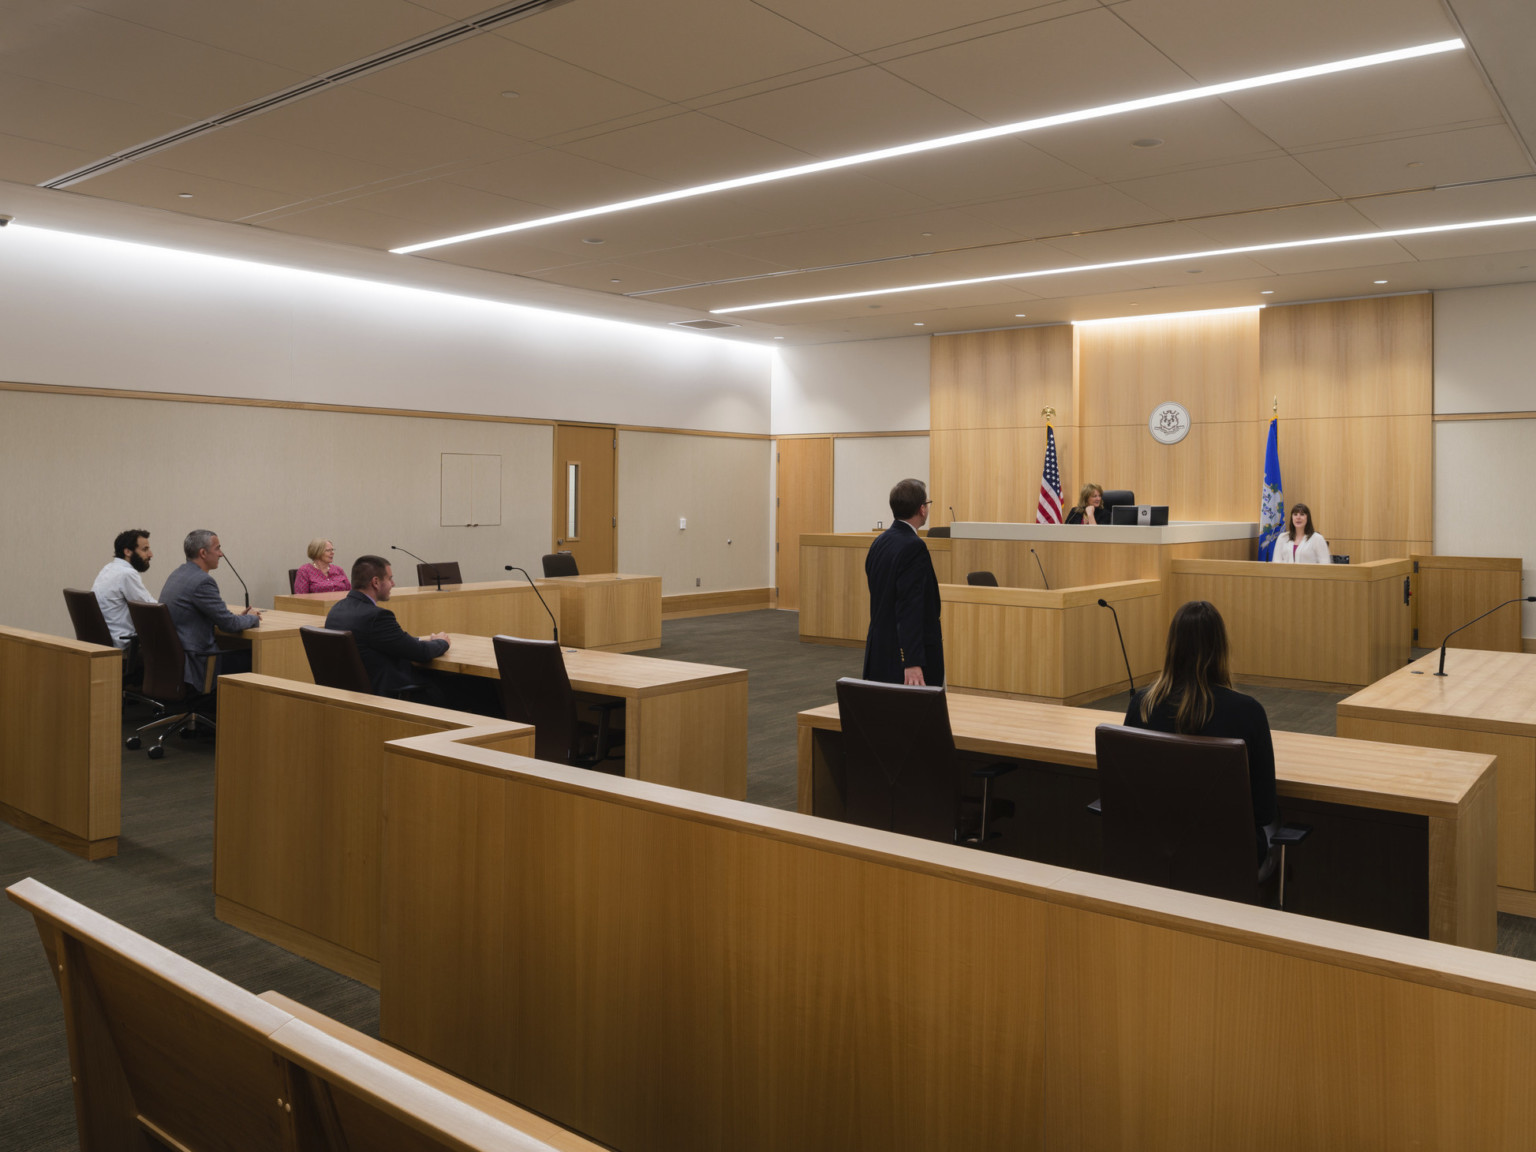 Interior courtroom with wood benches, rails and judge's seat. Wood panel accent wall at back with seal, recessed light rods